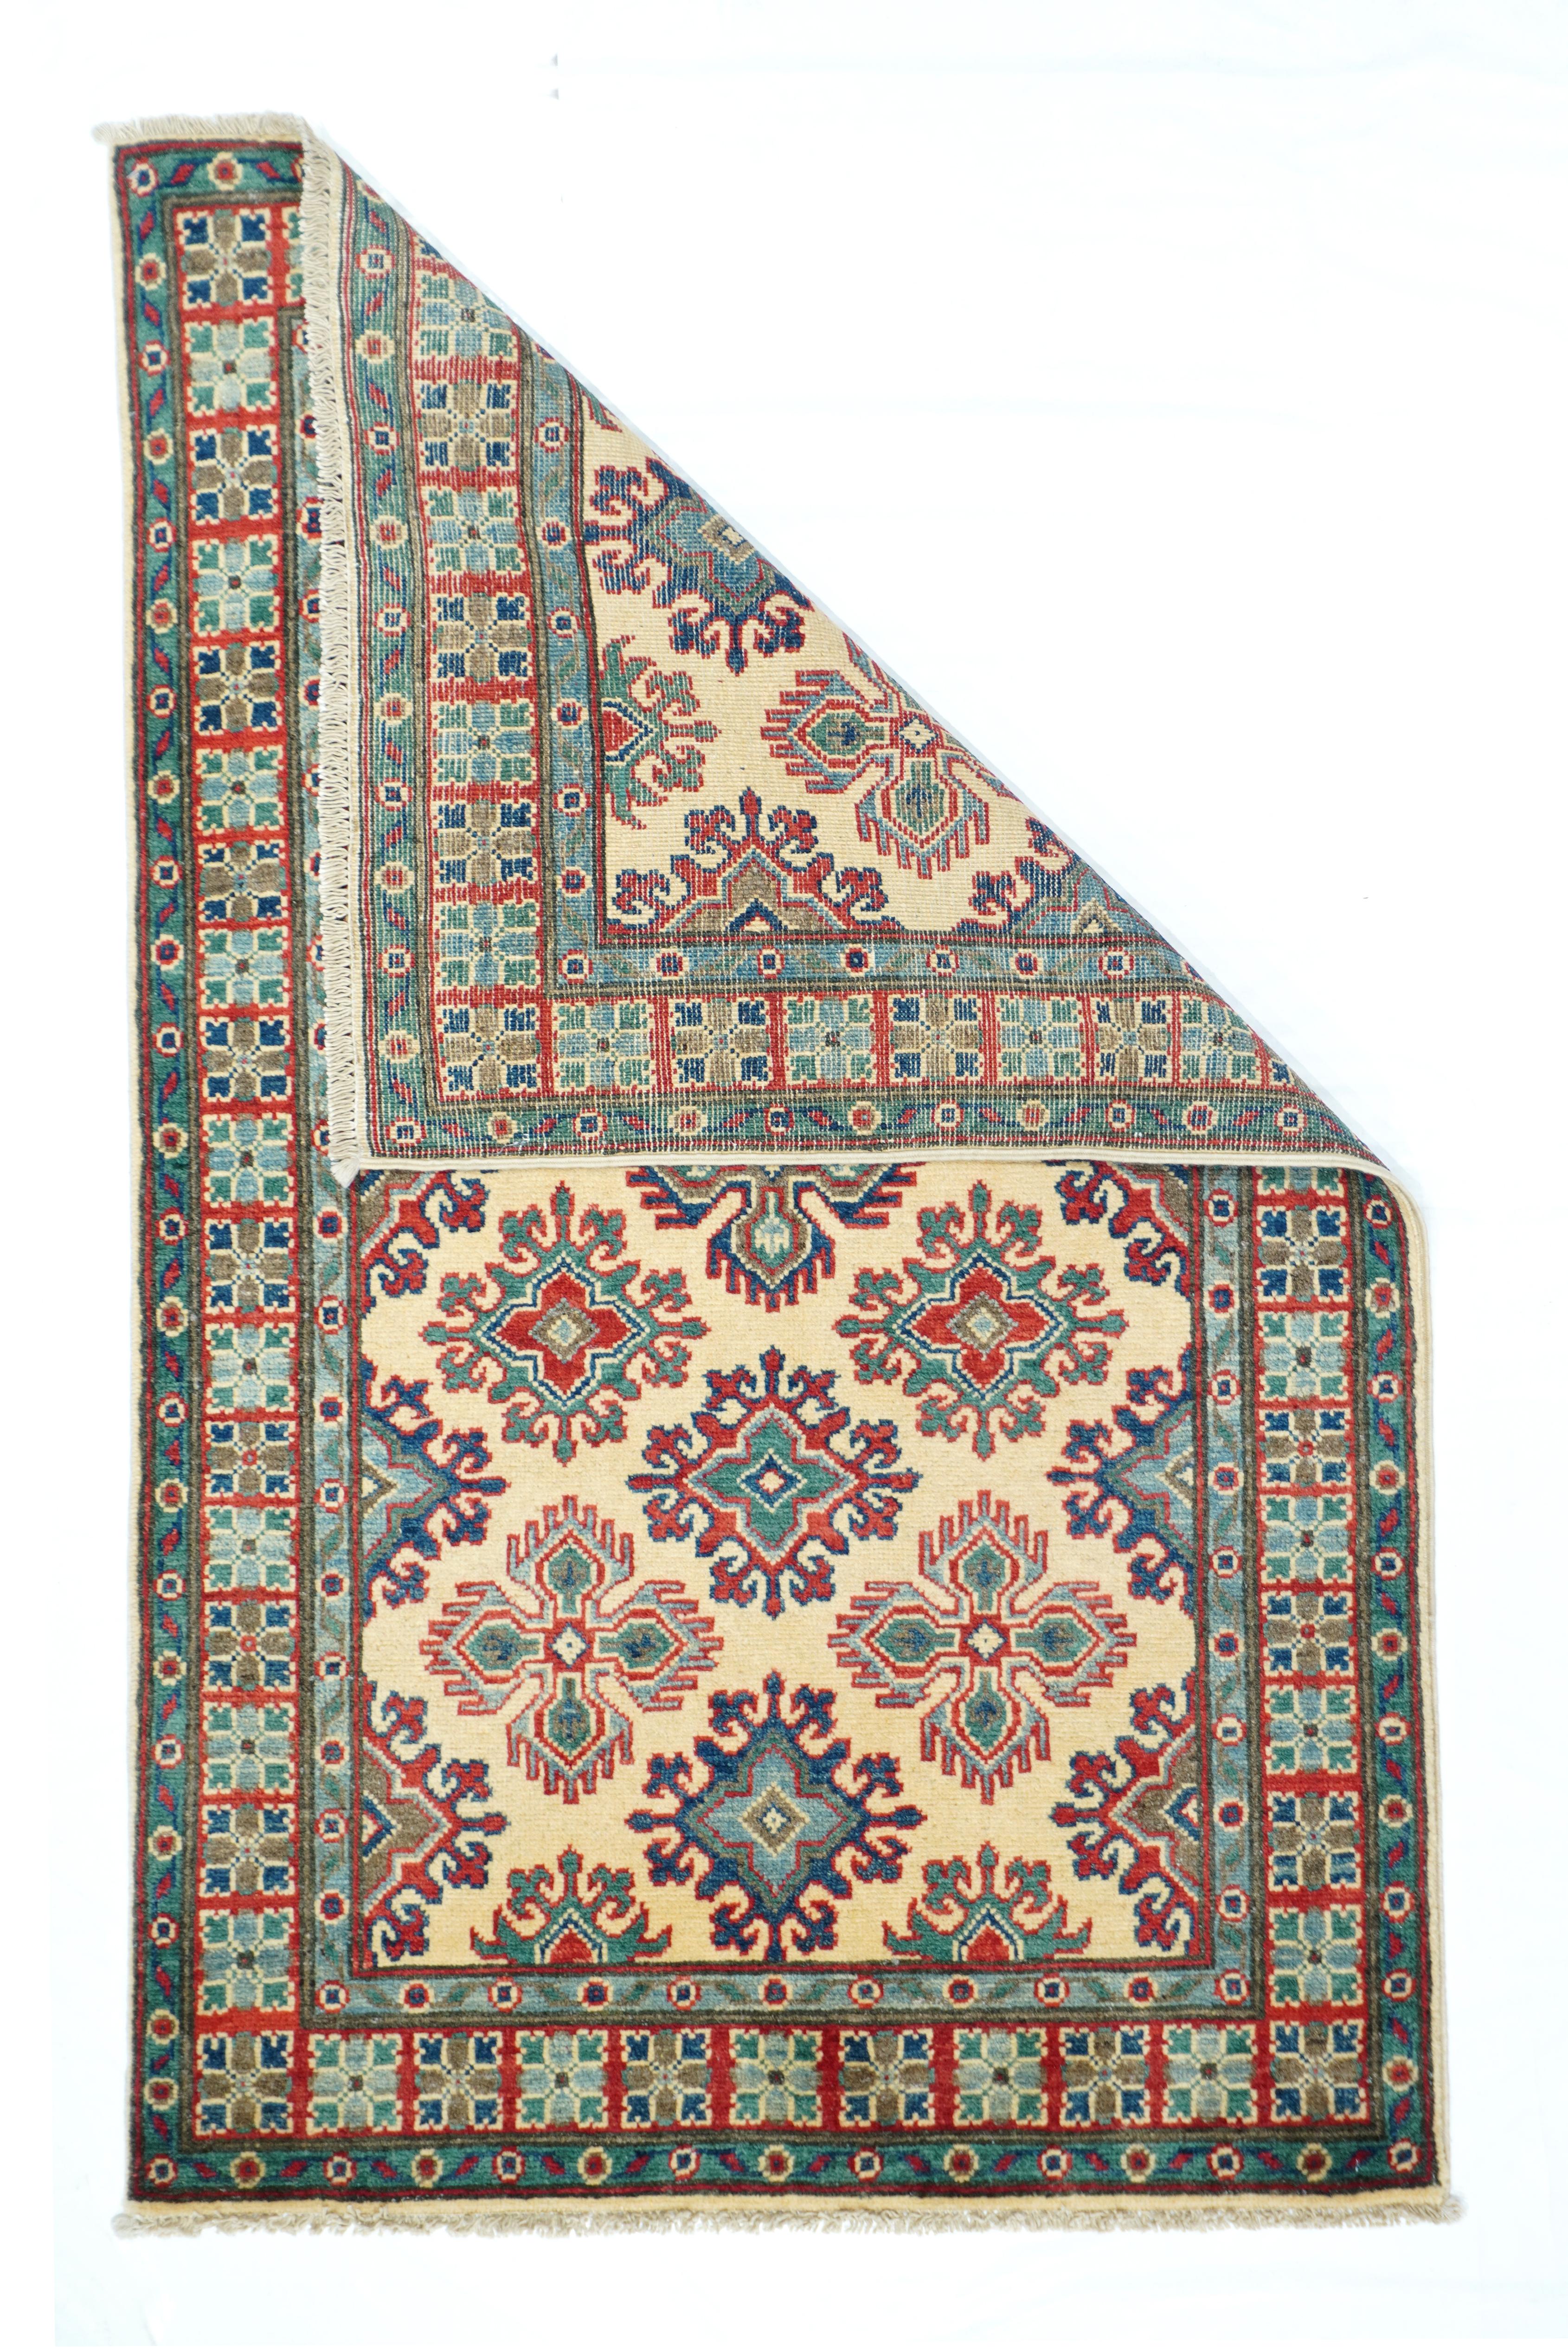 Kazak rug 3' x 5'. The straw-ivory field shows three complete offset columns of alternating palmette crosses and smaller cruciform with radiating pairs of hooks. Central palmete cross shows a comb finge. Partial crosses in lateral columns along the